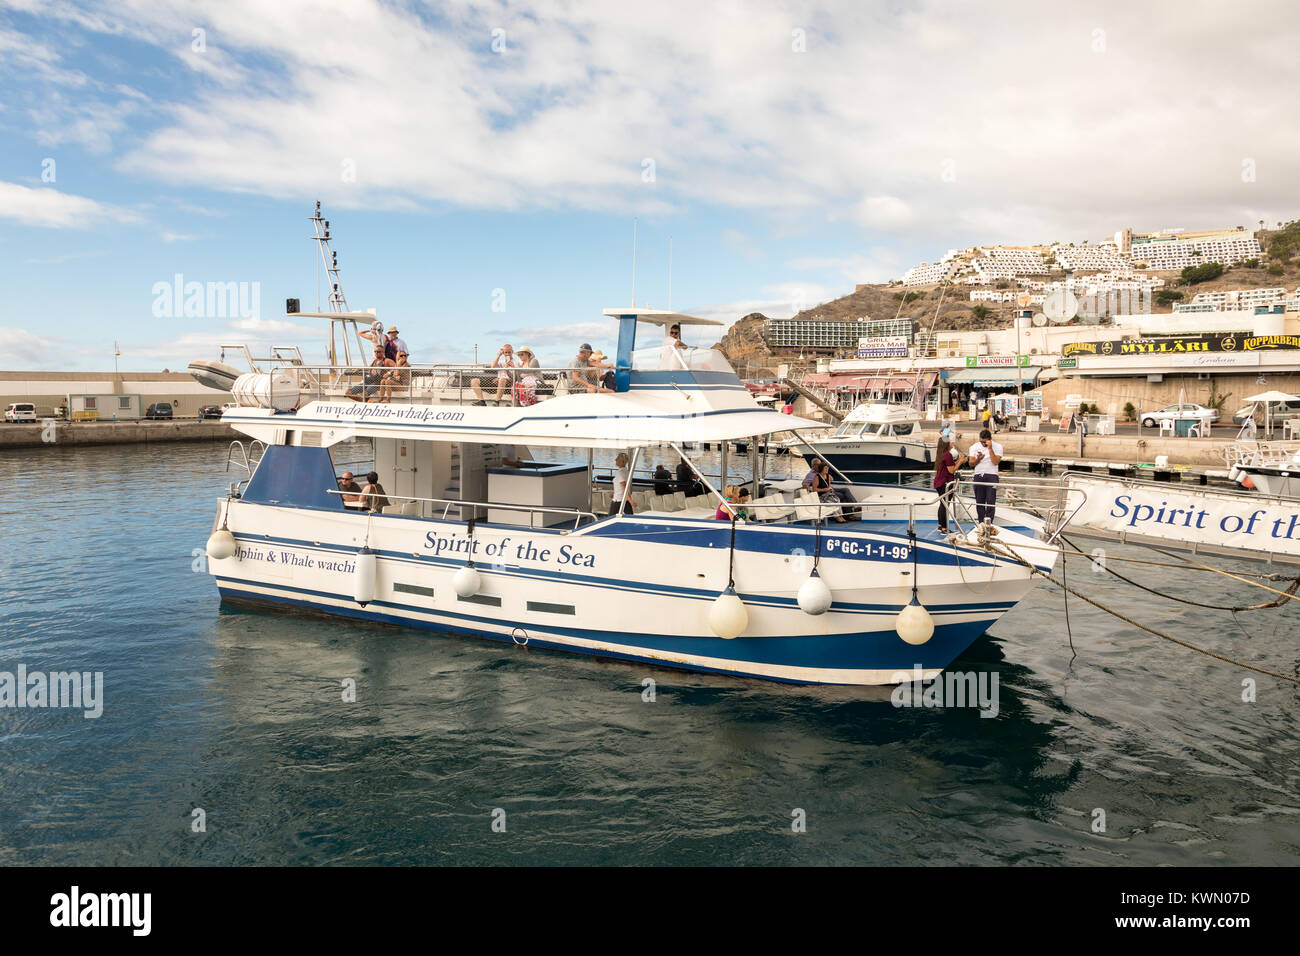 Puerto Rico, Gran Canaria - December 16, 2017: Marina of Puerto Rico, the  Spirit Of The Sea leaving the harbor with tourists, to watch dolphins and  whales Stock Photo - Alamy